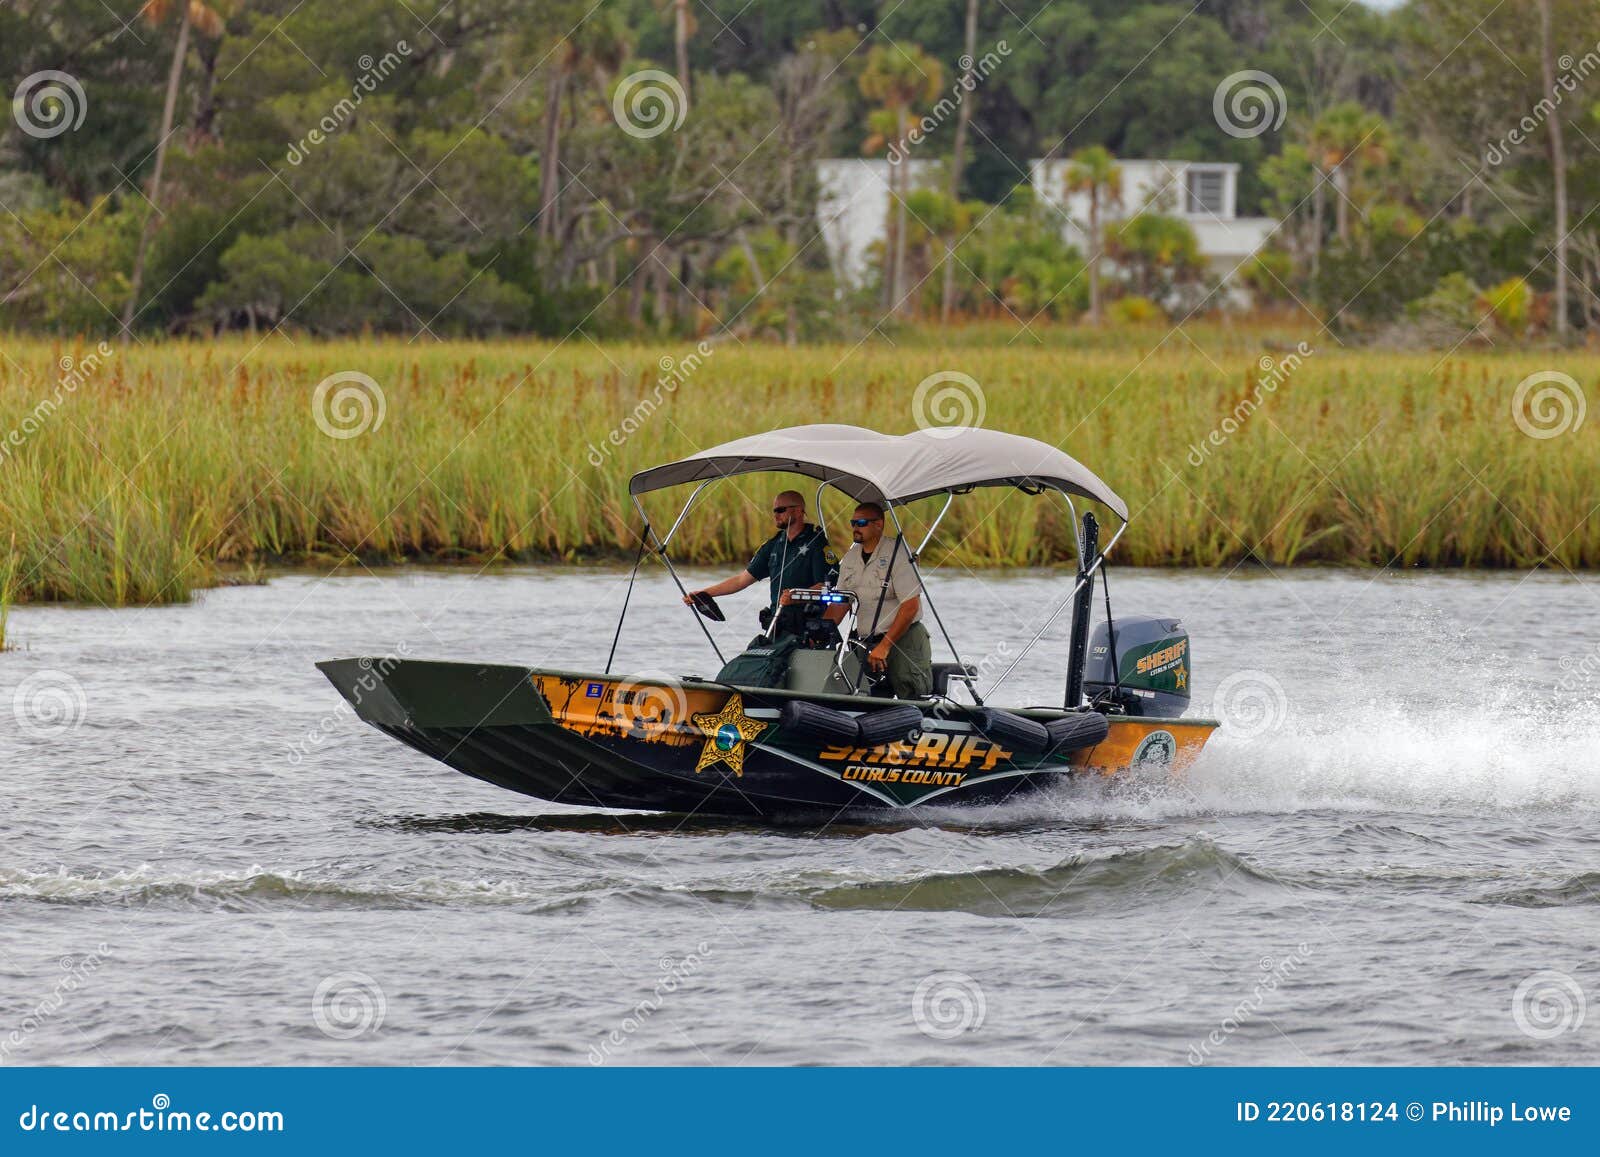 Law Enforcement On The Water Editorial Stock Image Image Of Marine Enforcement